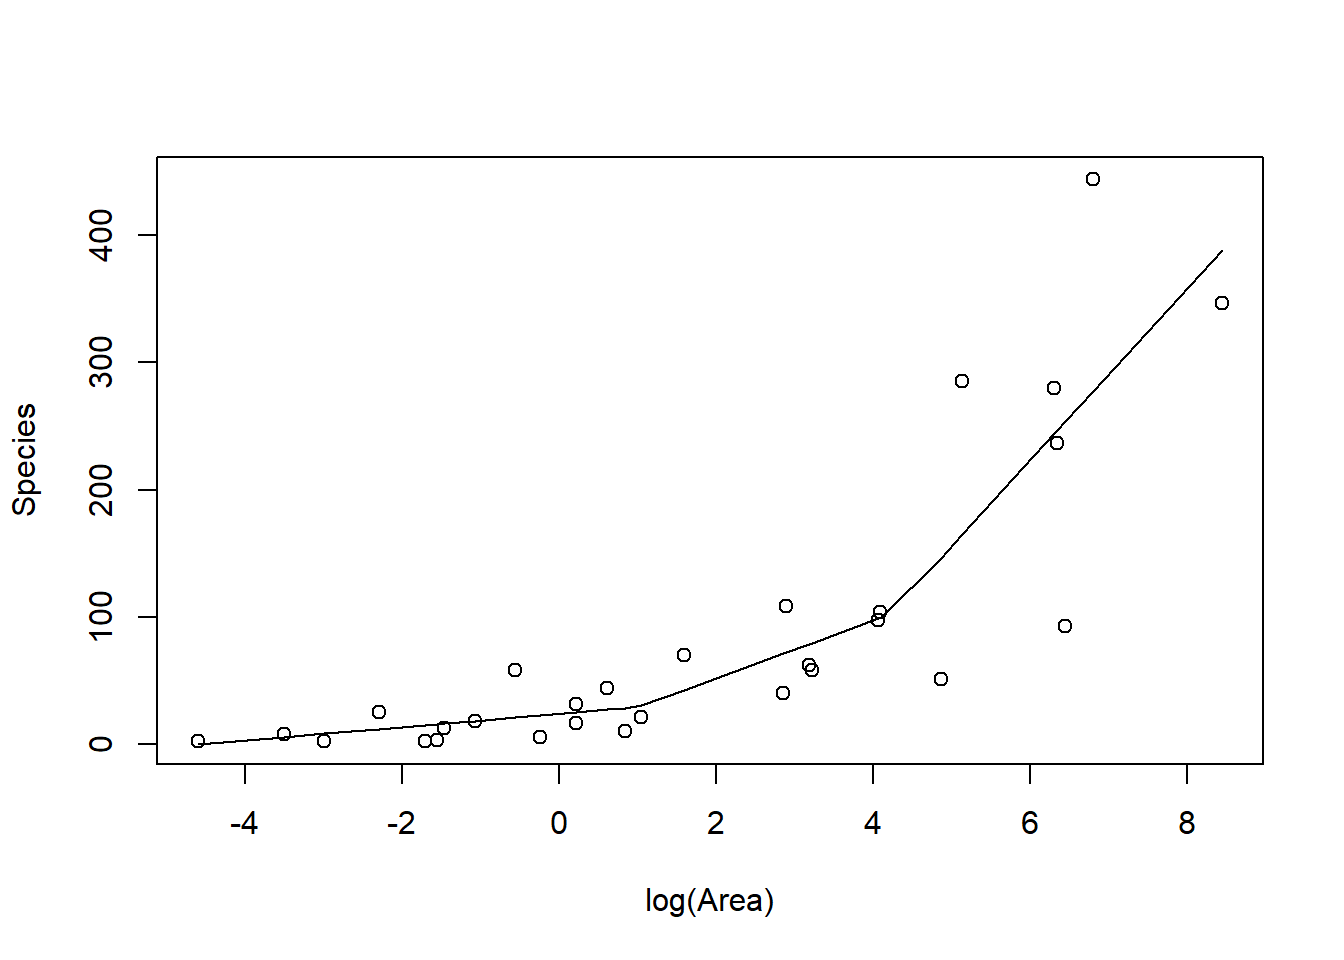 Piecewise linear model relating plant species richness to log(Area) for 29 islands in the Galapagos Islands archipelago. Data are from (Johnson & Raven, 1973).